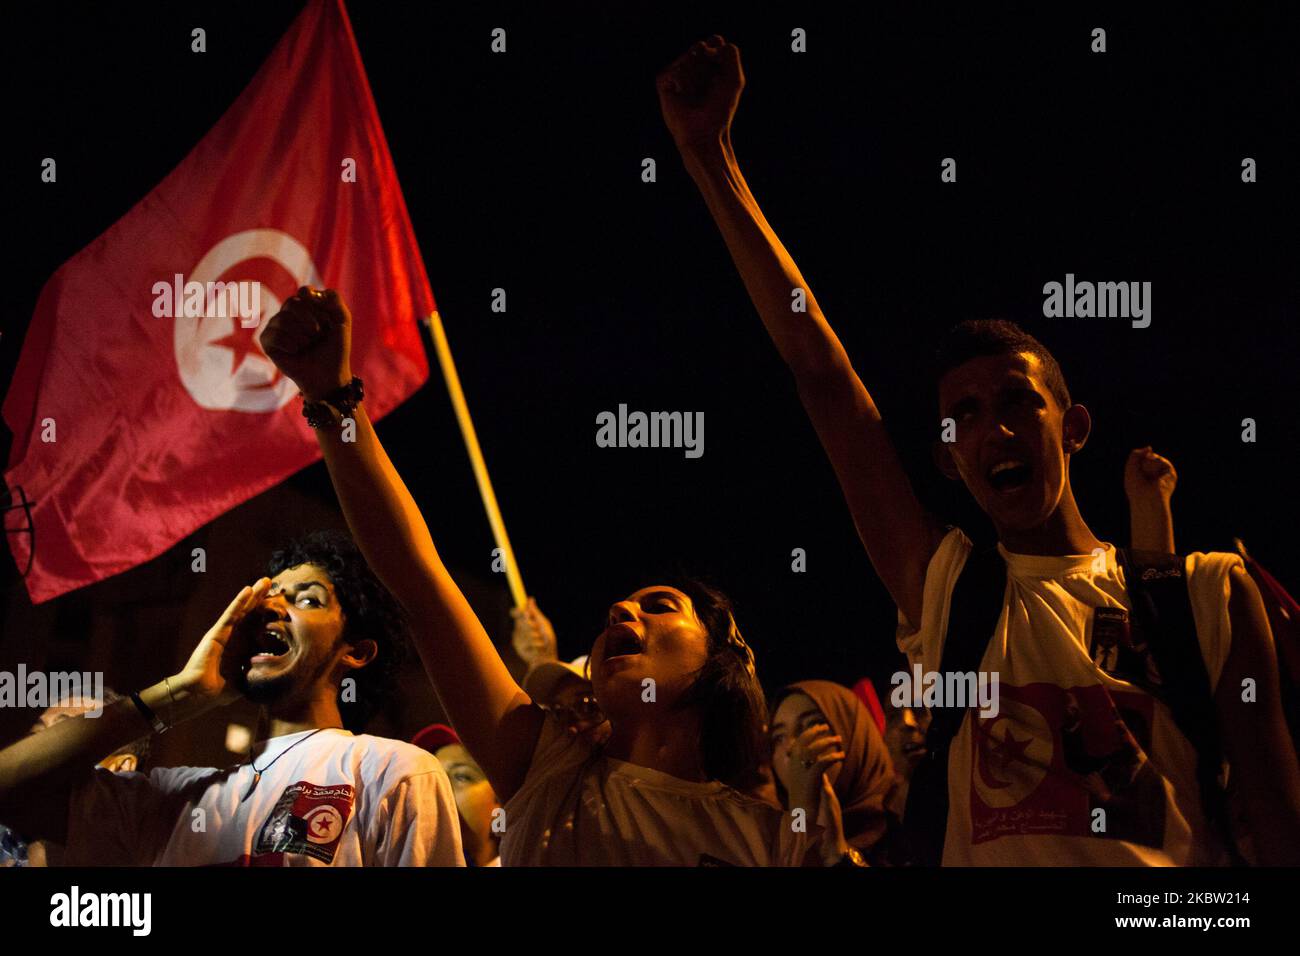 People wave a tunisien flag during a march outside the National Assembly at the bardo to mark the 40th day since the assassination of opposition politician Mohamed Brahmi. Brahmi was shot dead by unknown gunmen outside his home. On 7 September 2013, in Tunis, Tunisia. (Photo by Emeric Fohlen/NurPhoto) Stock Photo